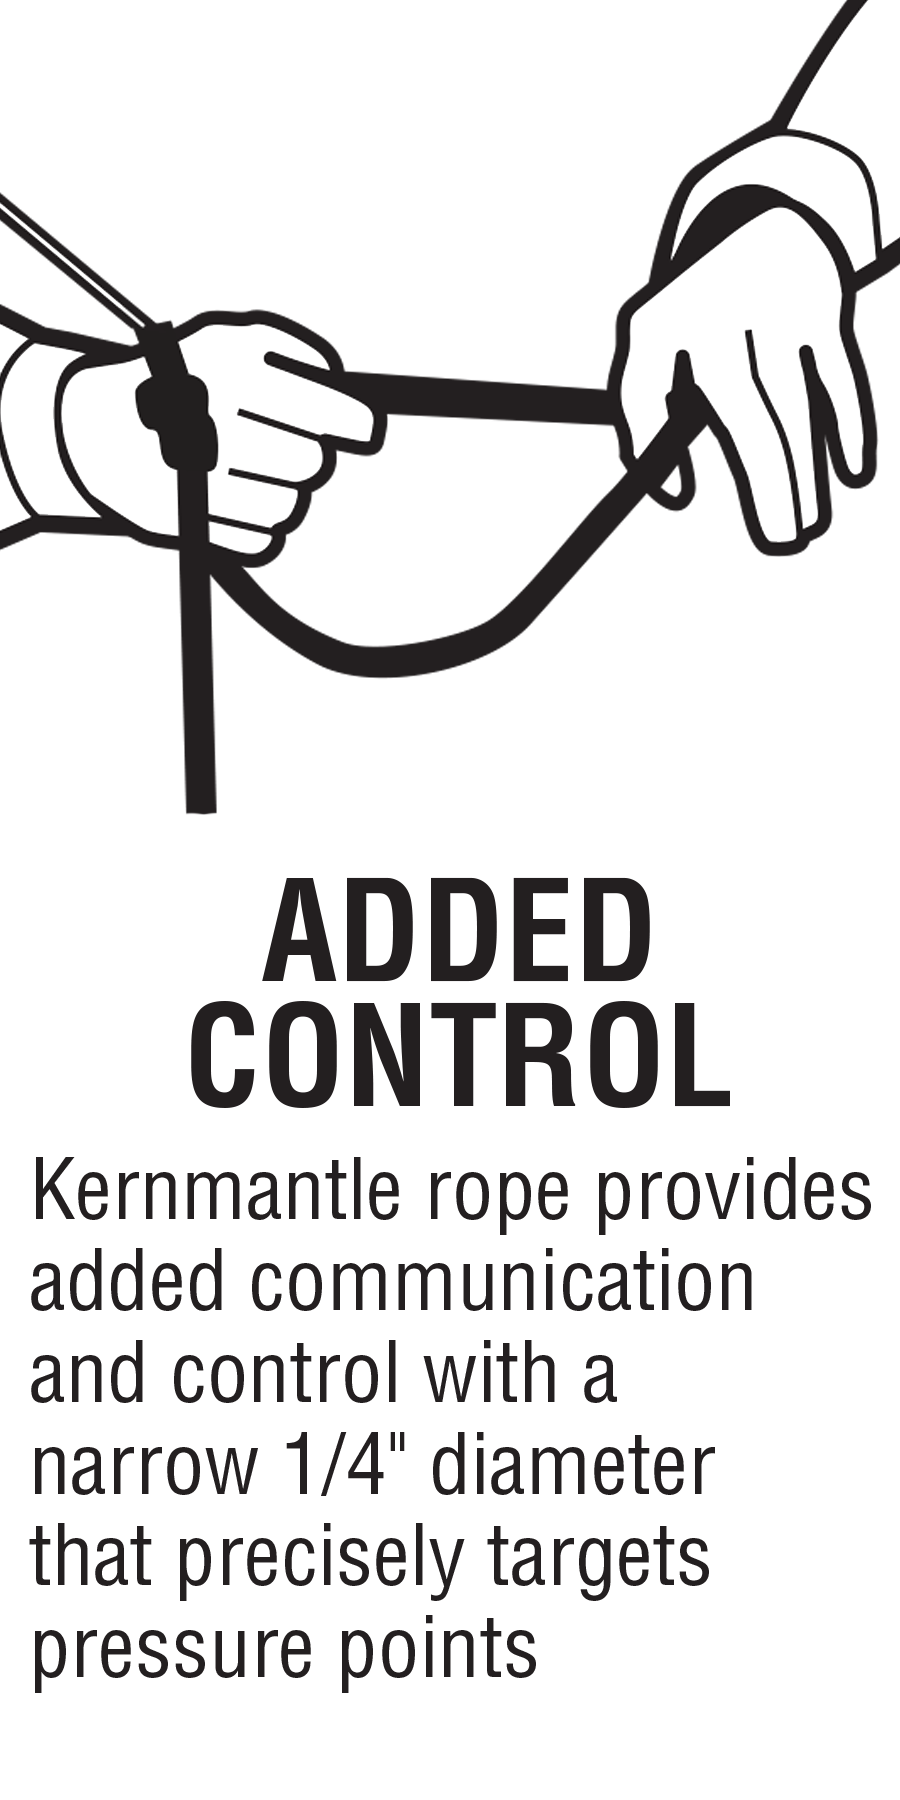 Kernmantle rope provides added communication and control with a narrow 1/4 inch diameter that precisely targets pressure points